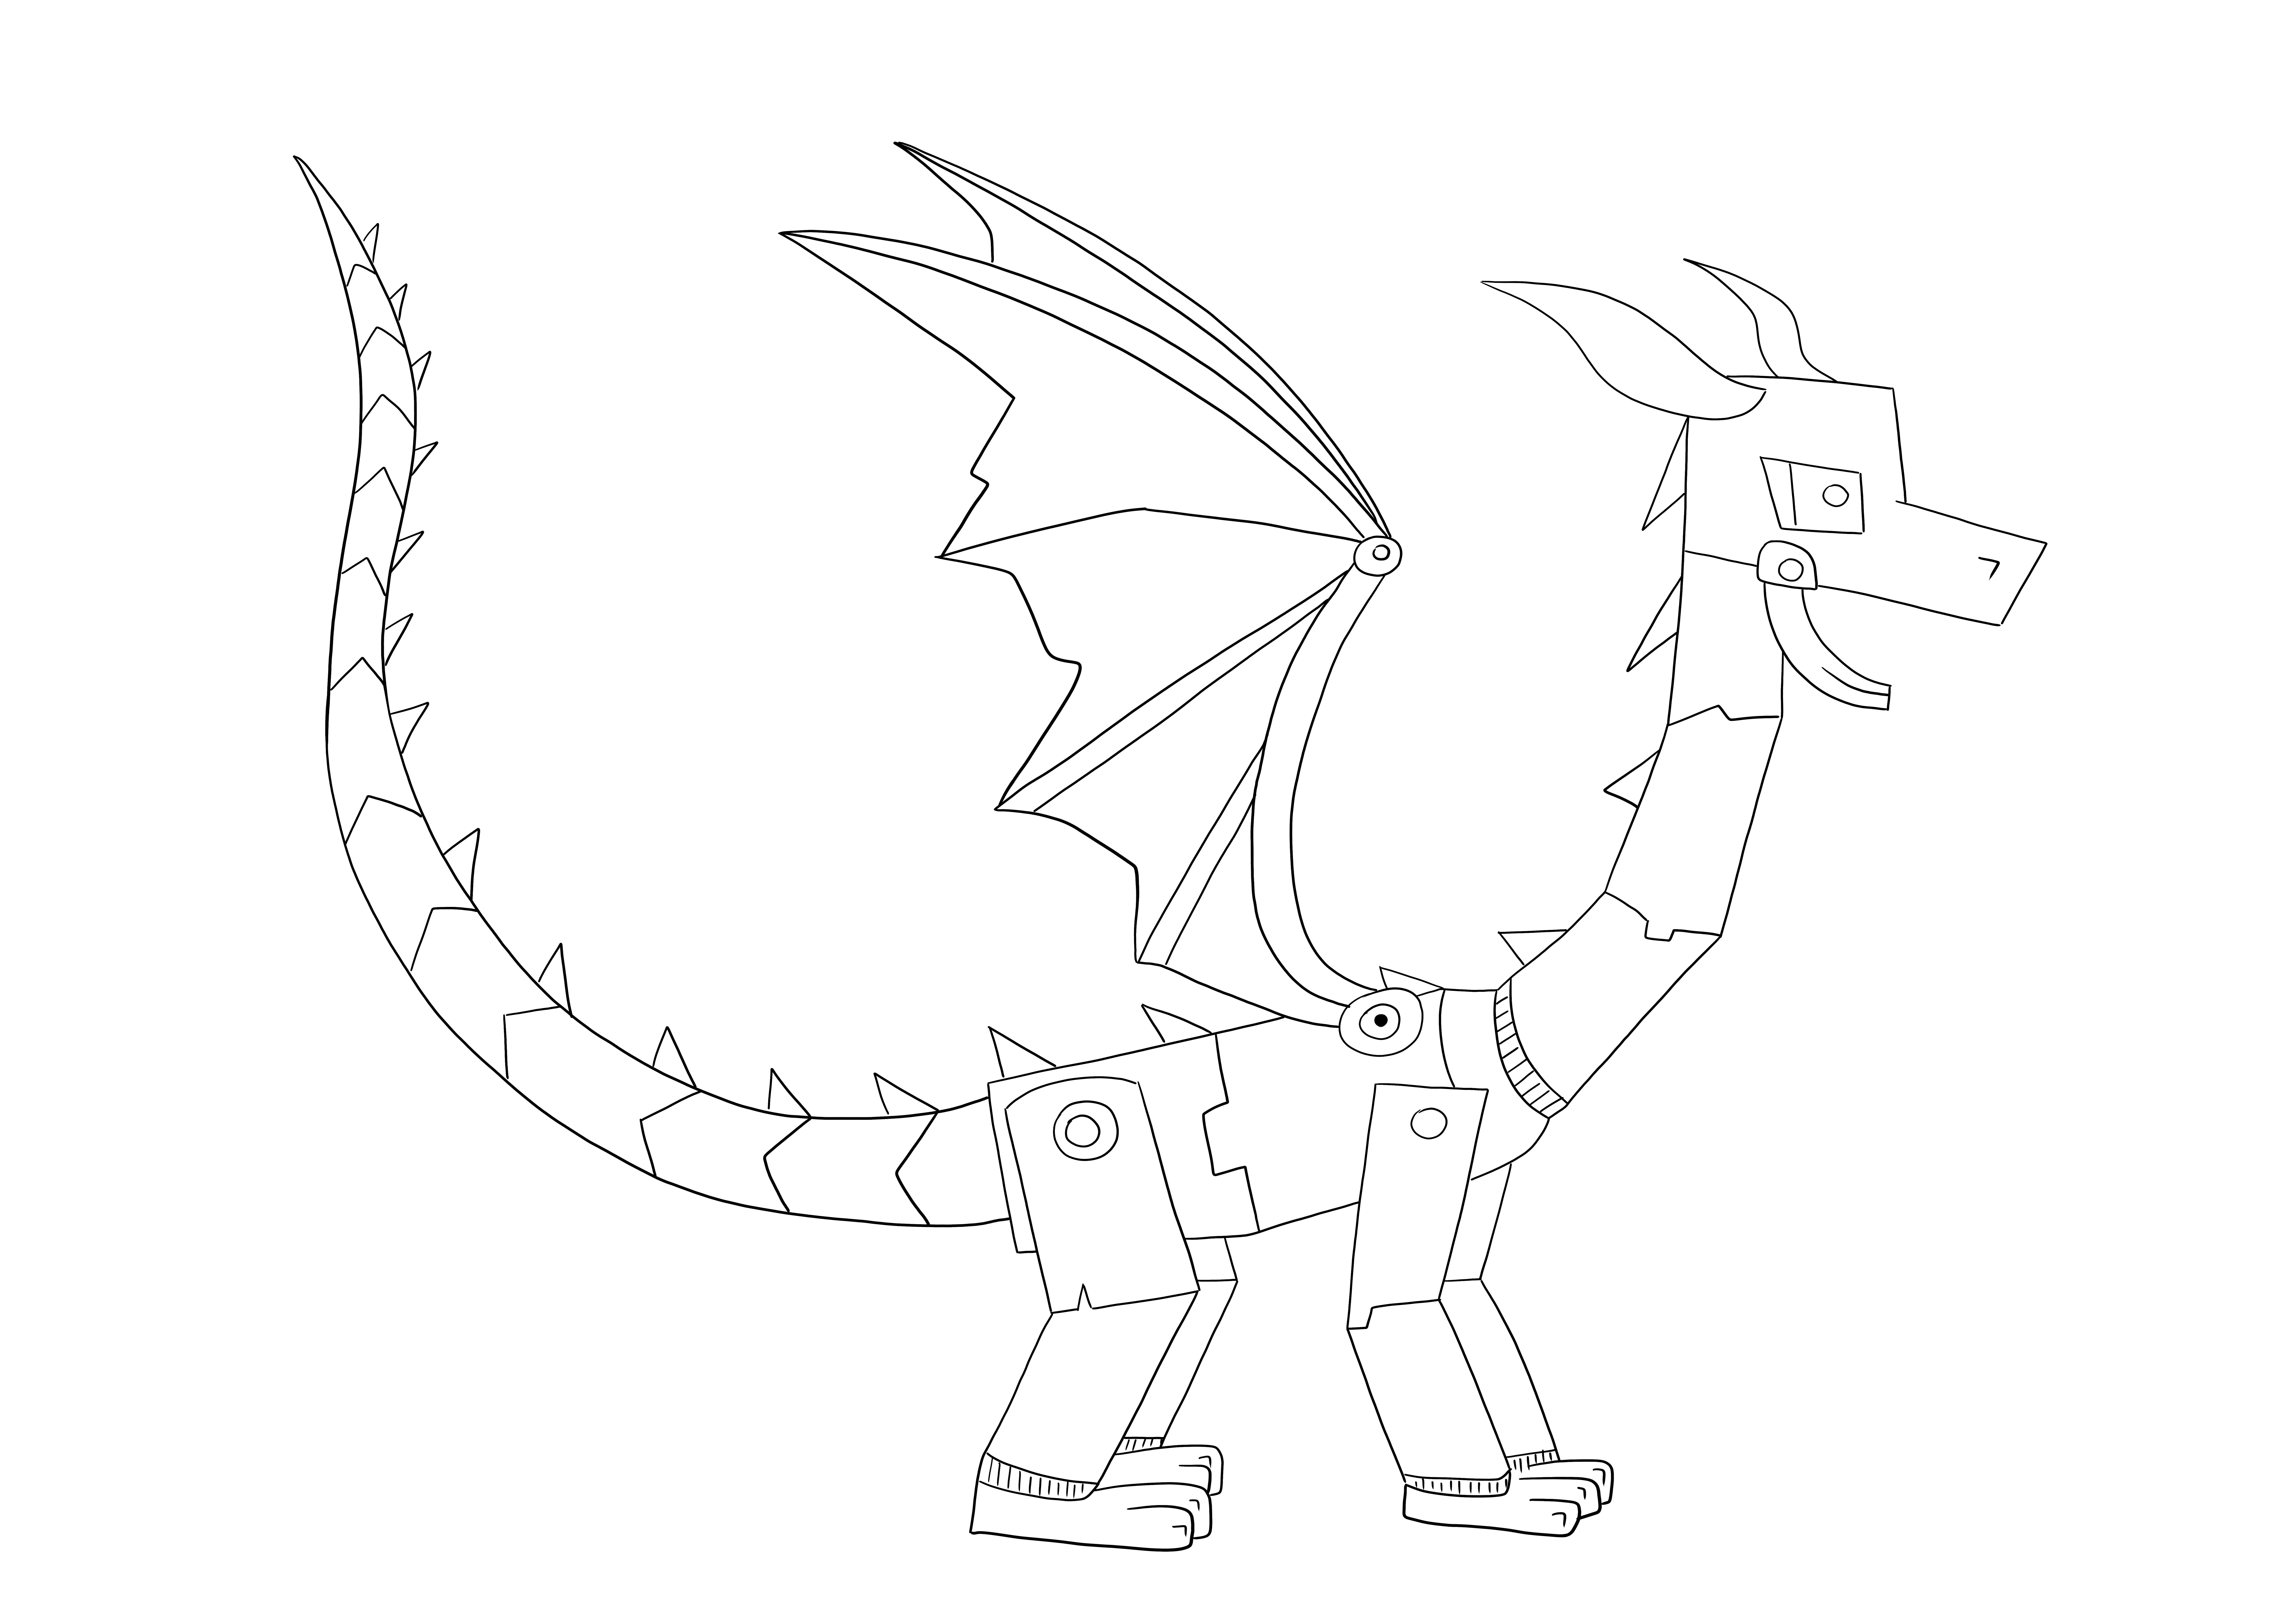 Ender Dragon from Minecraft game coloring sheet to print for free